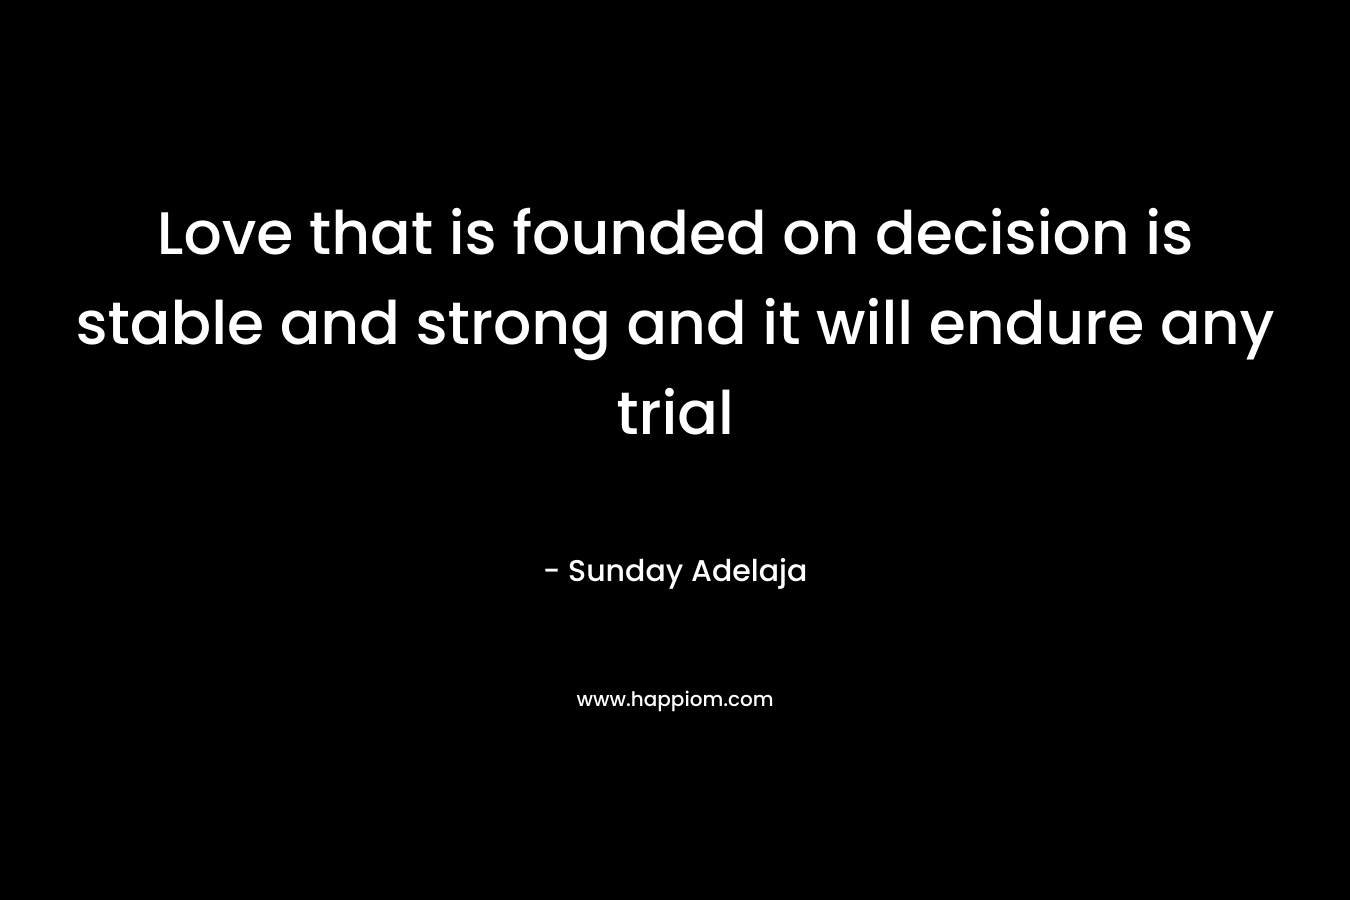 Love that is founded on decision is stable and strong and it will endure any trial – Sunday Adelaja